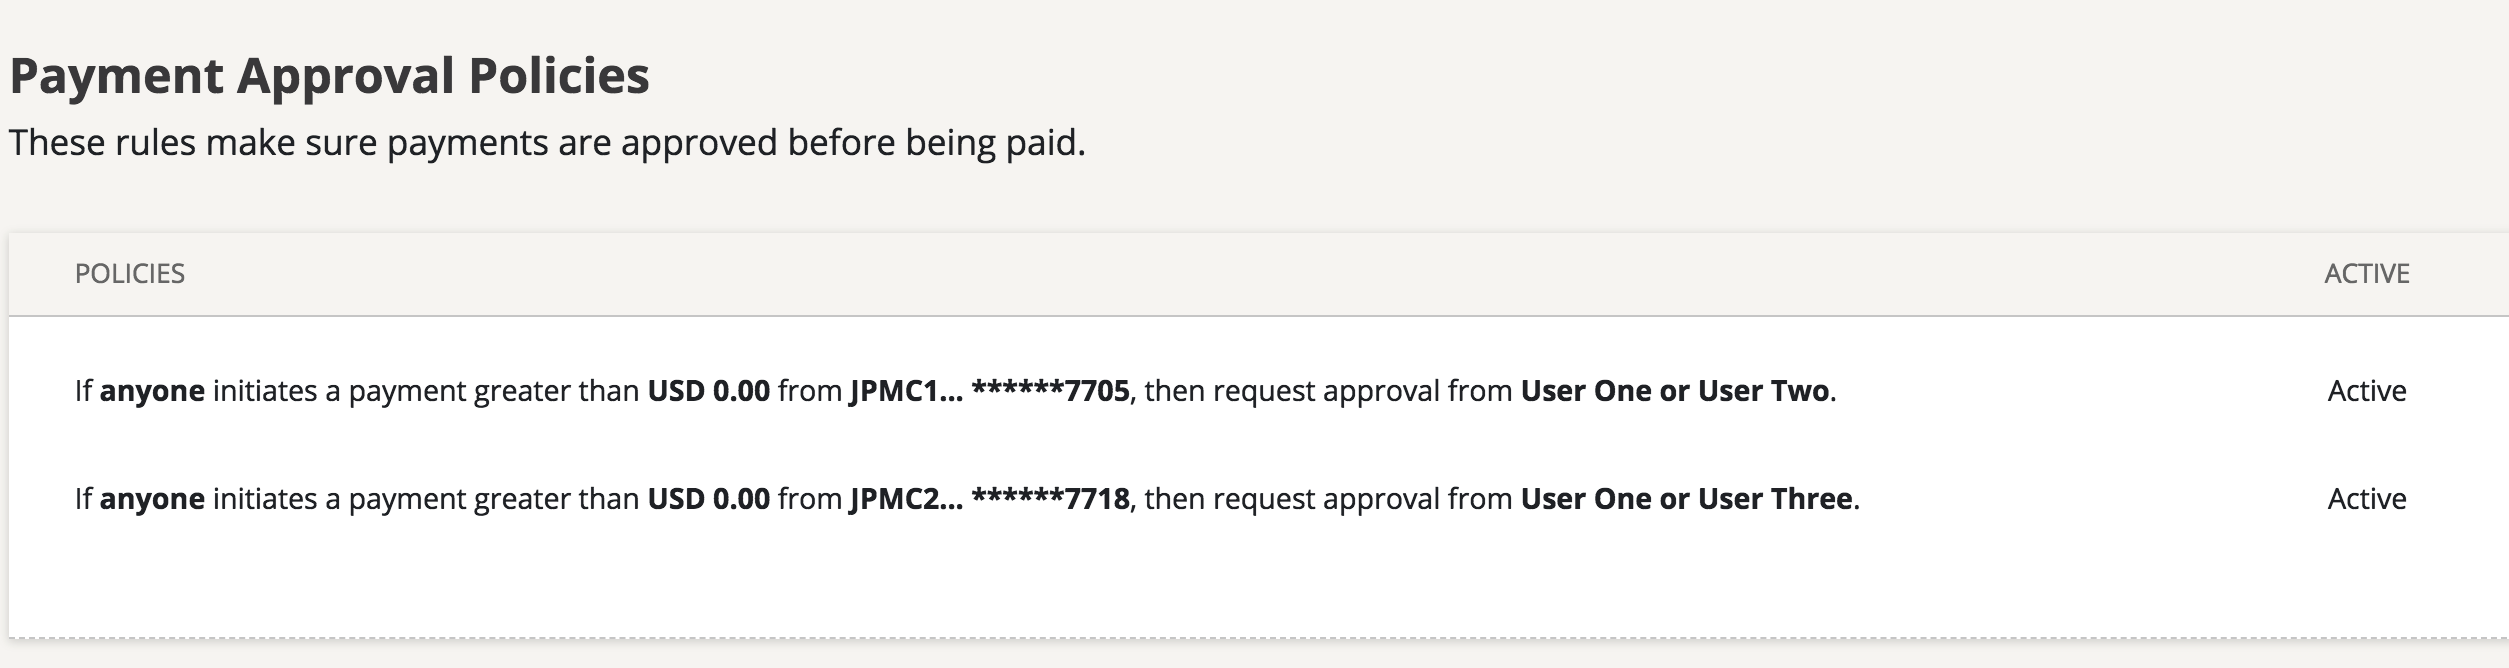 Auth user payment approval policies